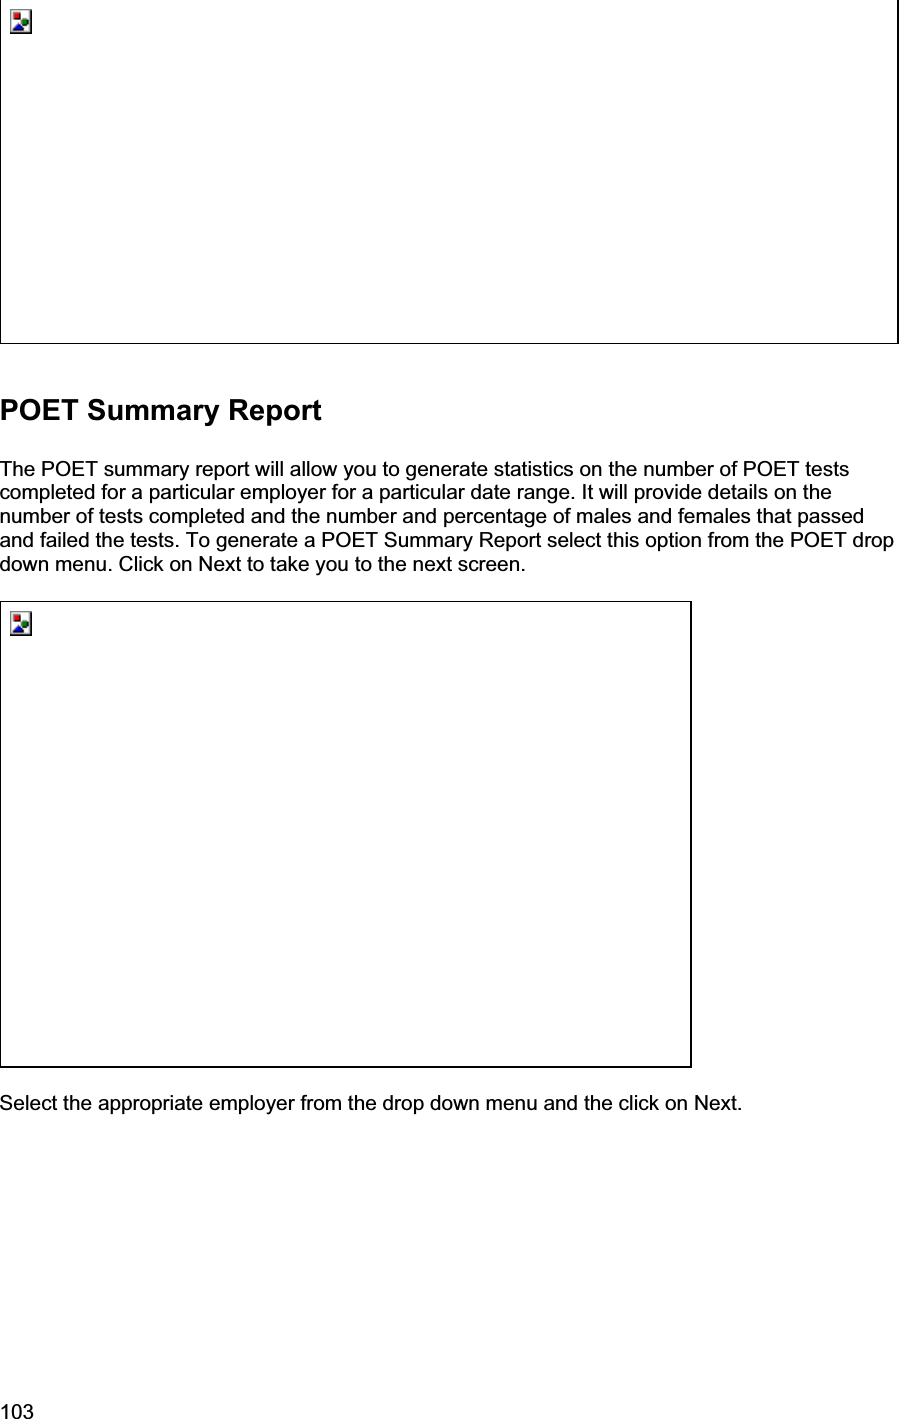 103     POET Summary Report The POET summary report will allow you to generate statistics on the number of POET tests completed for a particular employer for a particular date range. It will provide details on the number of tests completed and the number and percentage of males and females that passed and failed the tests. To generate a POET Summary Report select this option from the POET drop down menu. Click on Next to take you to the next screen. Select the appropriate employer from the drop down menu and the click on Next. 